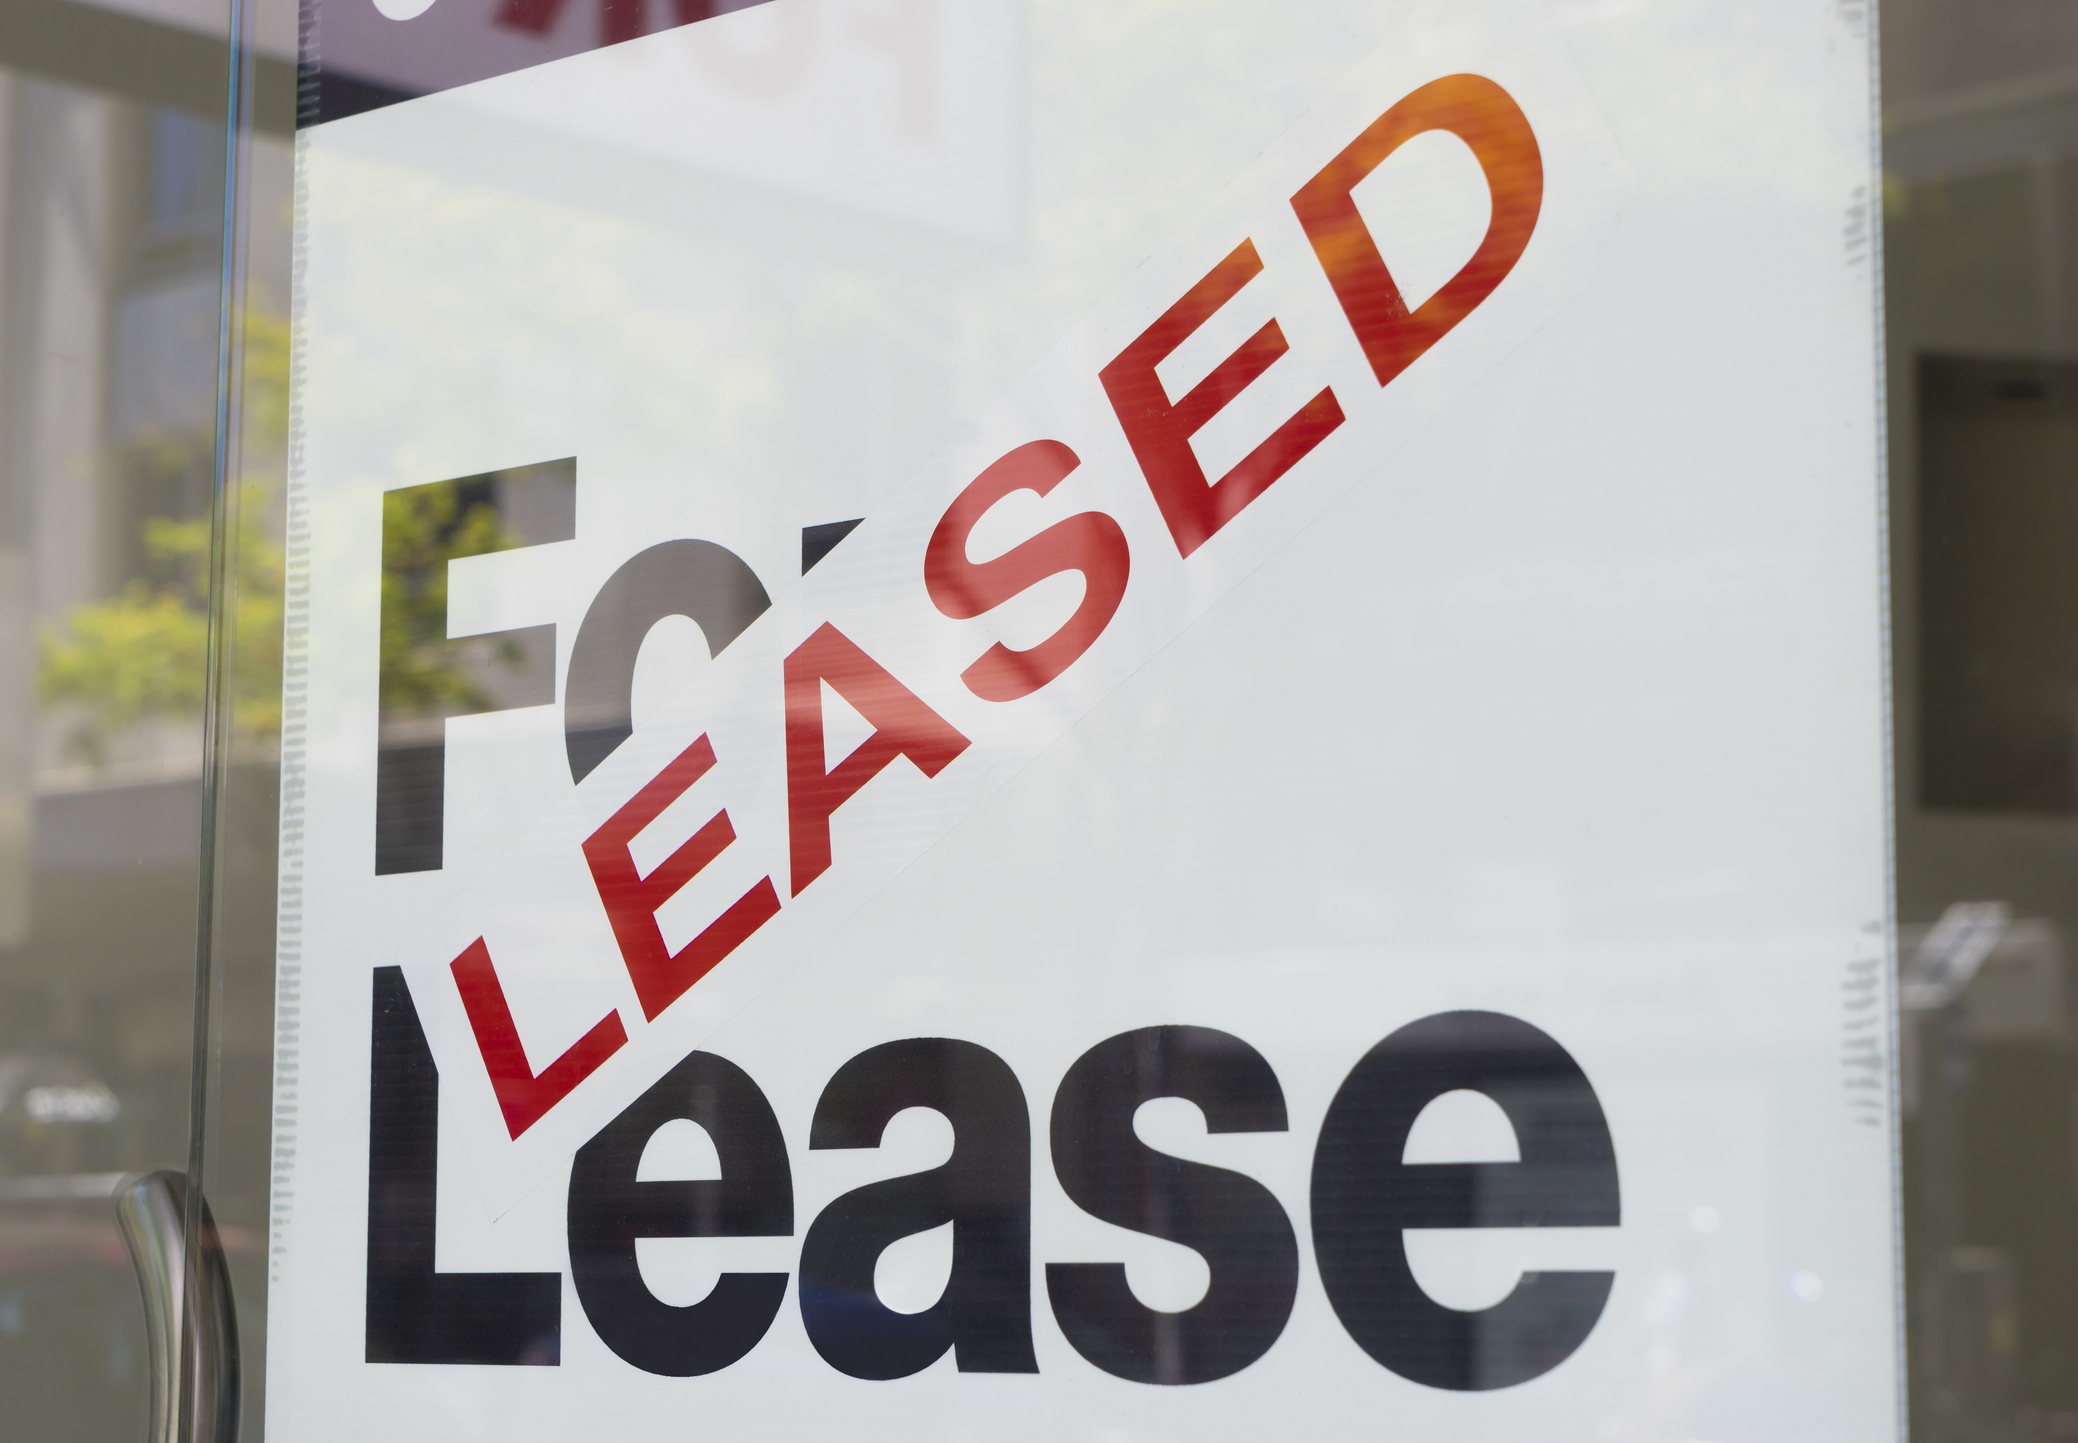 for-lease-and-leased-sign-639663220_2082x1445